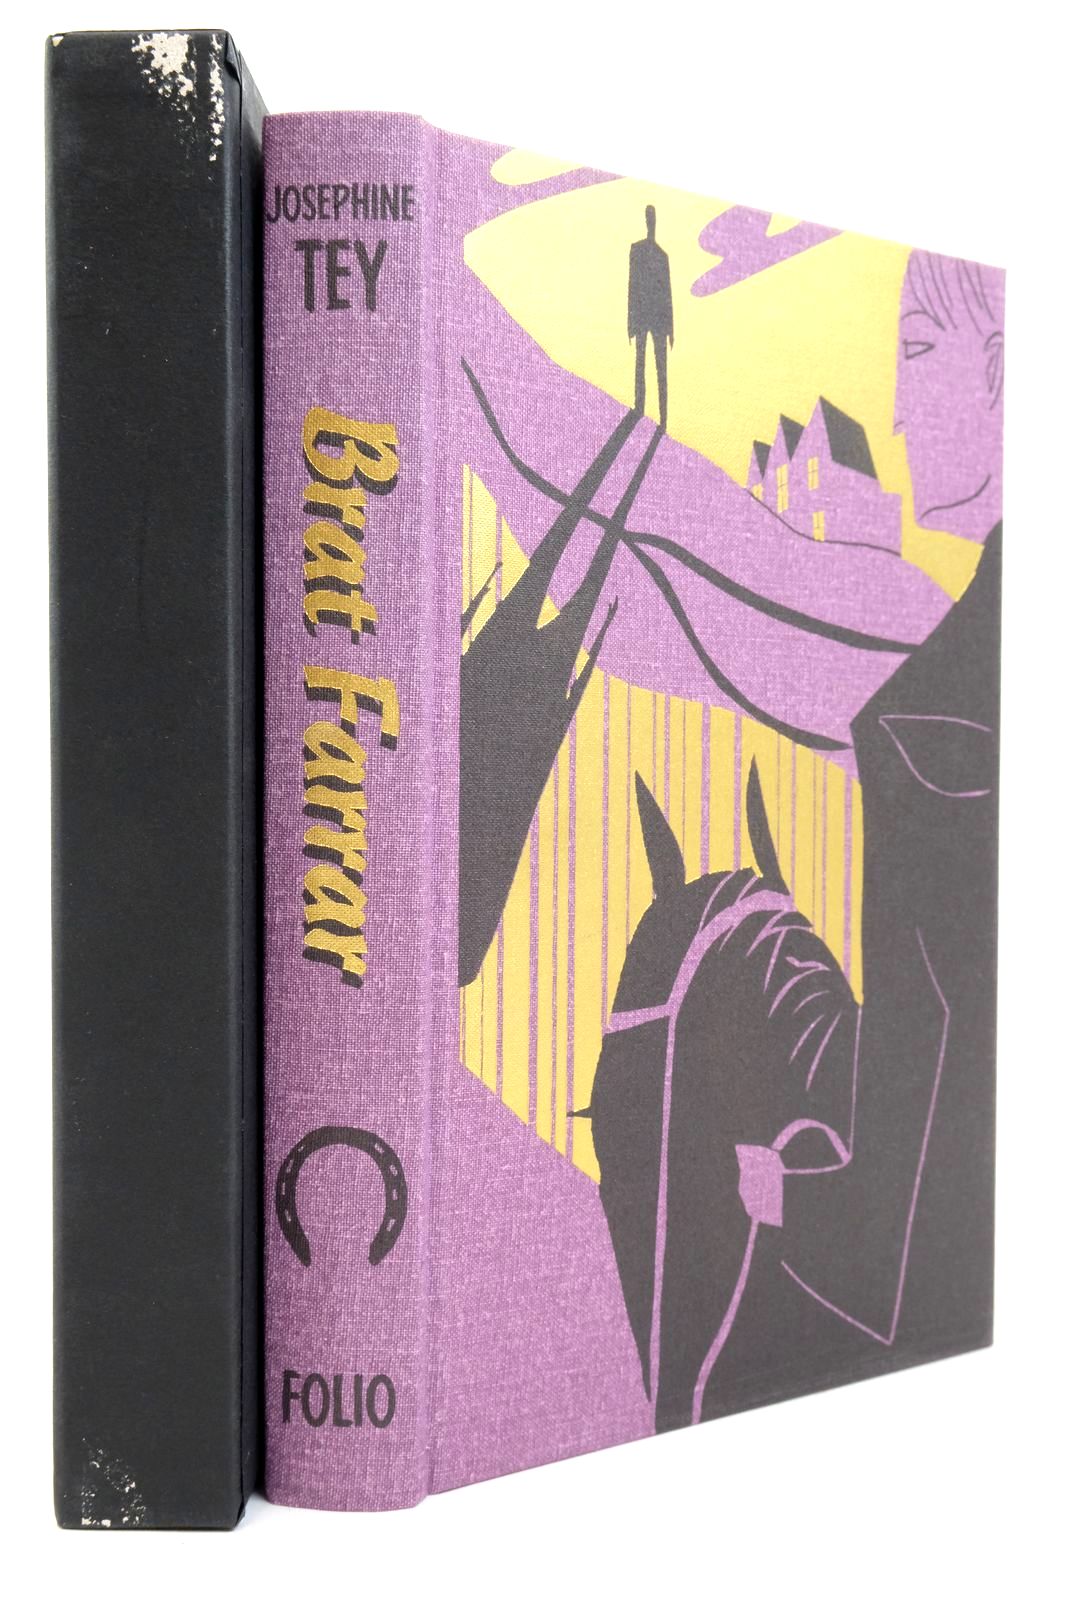 Photo of BRAT FARRAR written by Tey, Josephine Rendell, Ruth illustrated by Allen, A. Richard published by Folio Society (STOCK CODE: 2138108)  for sale by Stella & Rose's Books